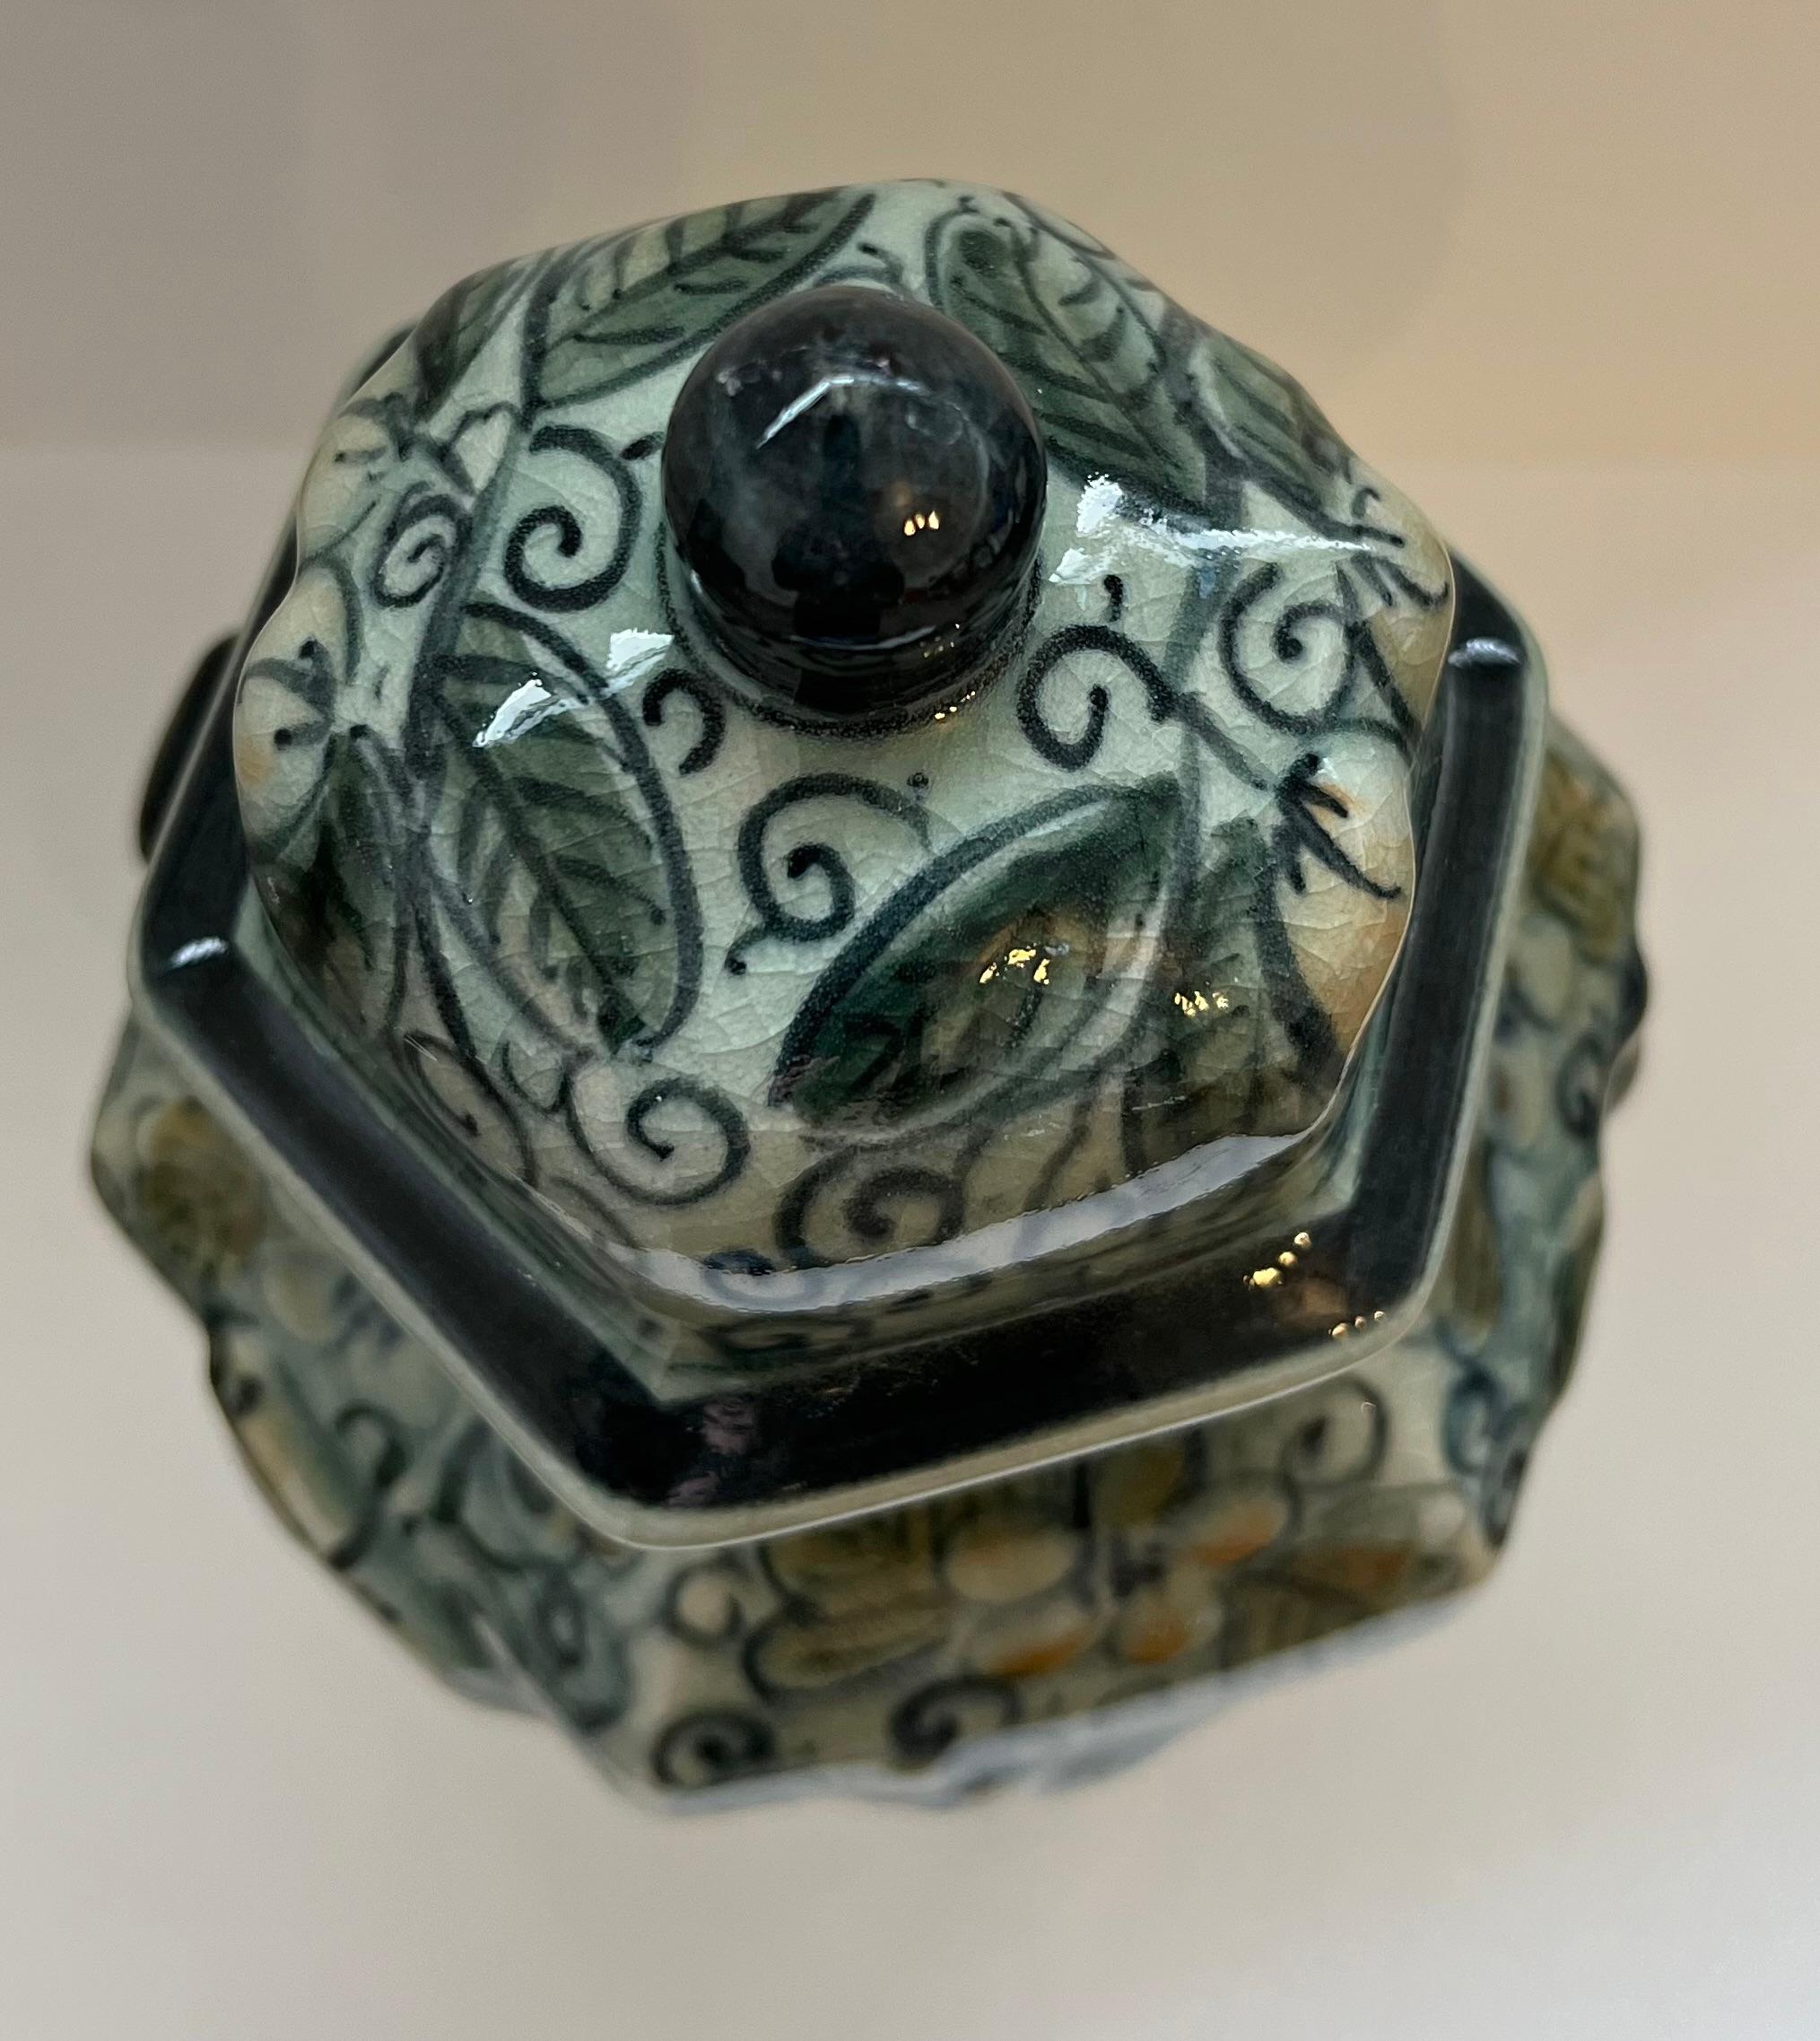 Stunning Maitland Smith Celadon Ceramic Crackle Covered Jar that was handmade in Thailand. It has a vibrant, hand-painted floral and leaf motif with raised ornate designs on each of its six sides. The vase has a subtle crackle glaze and ornate